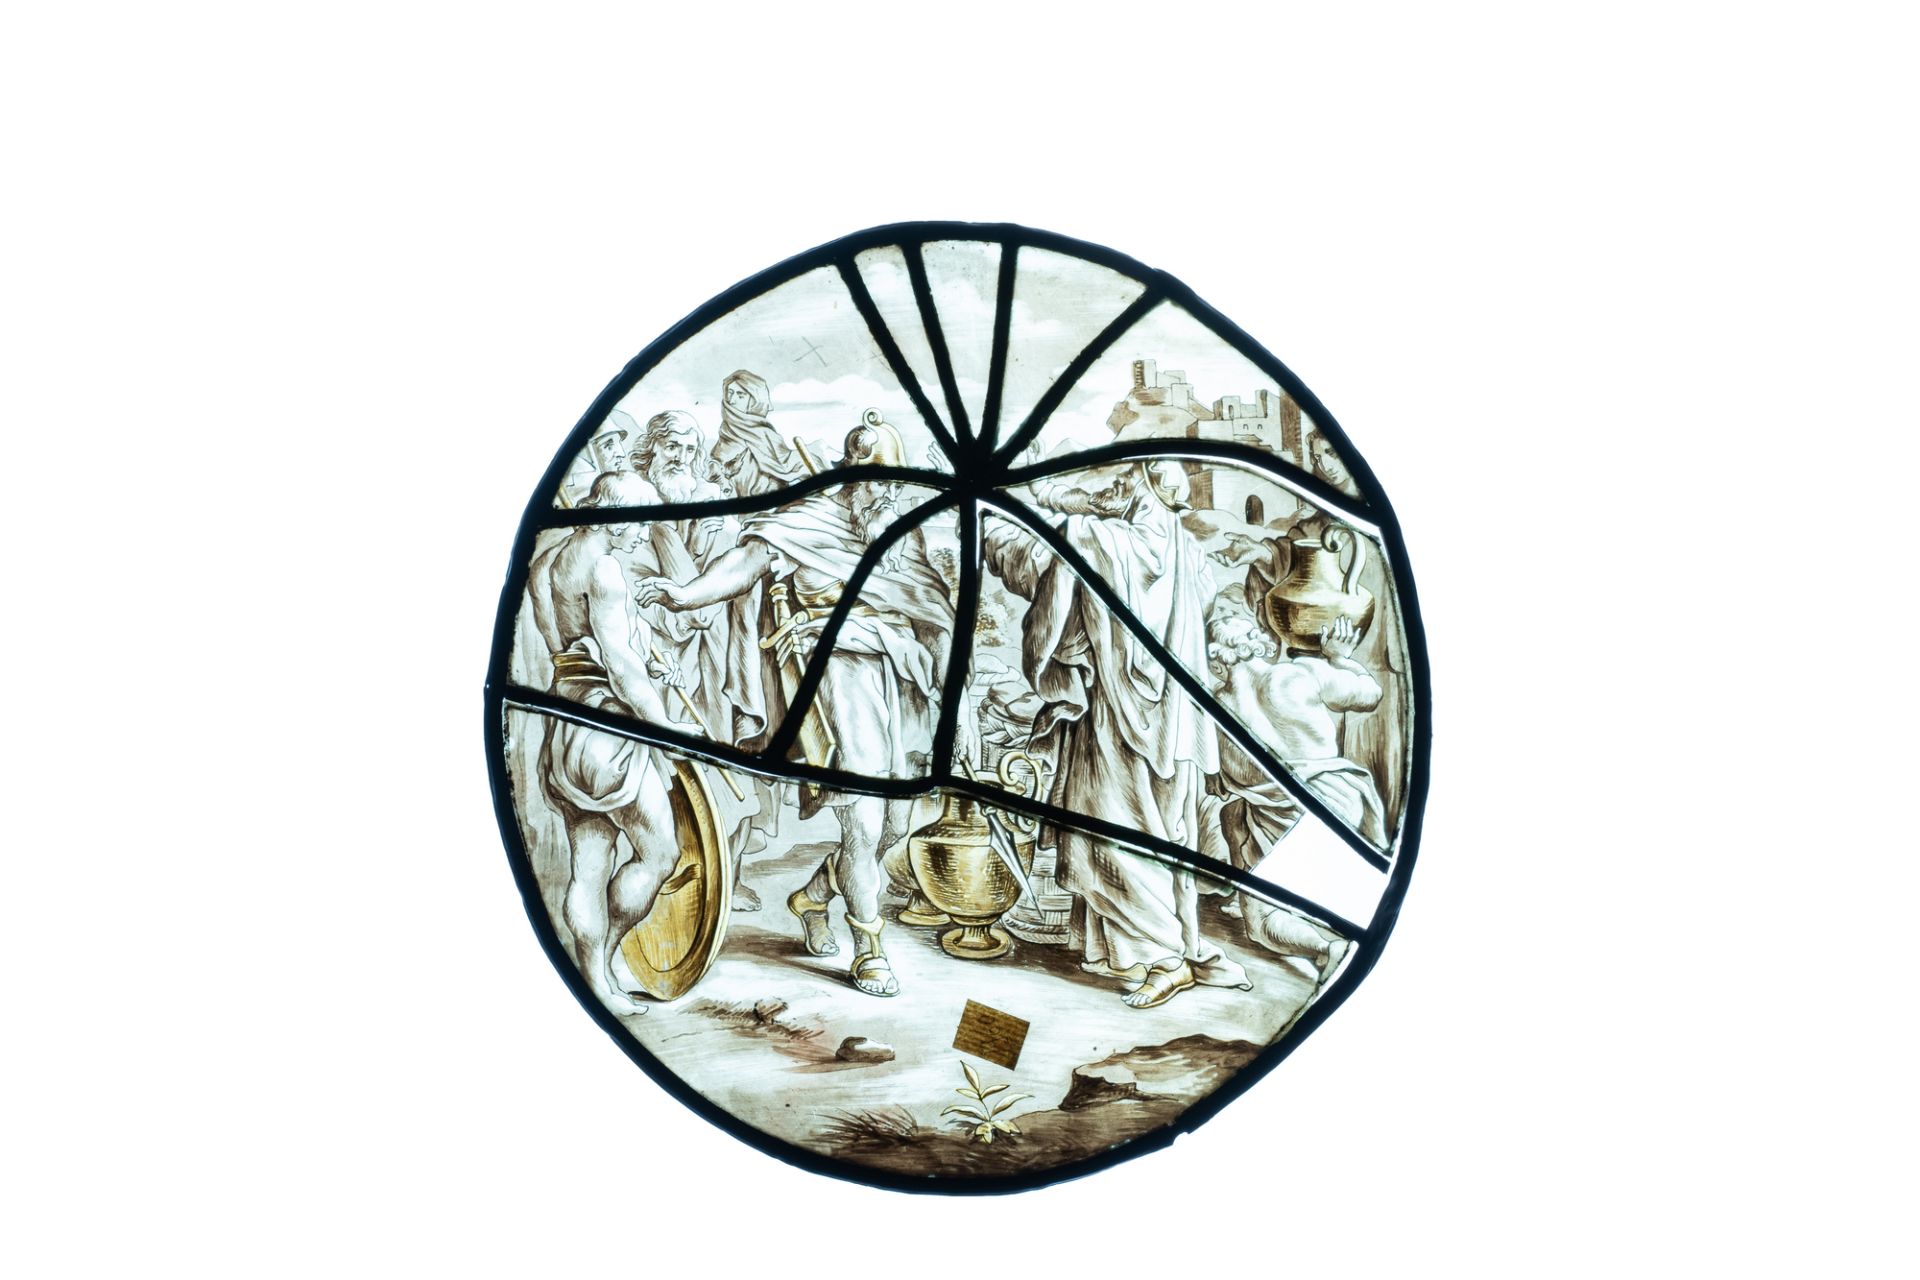 A pair of grisaille and silver yellow painted glass roundels with biblical scenes, France, 17th C. - Image 2 of 5